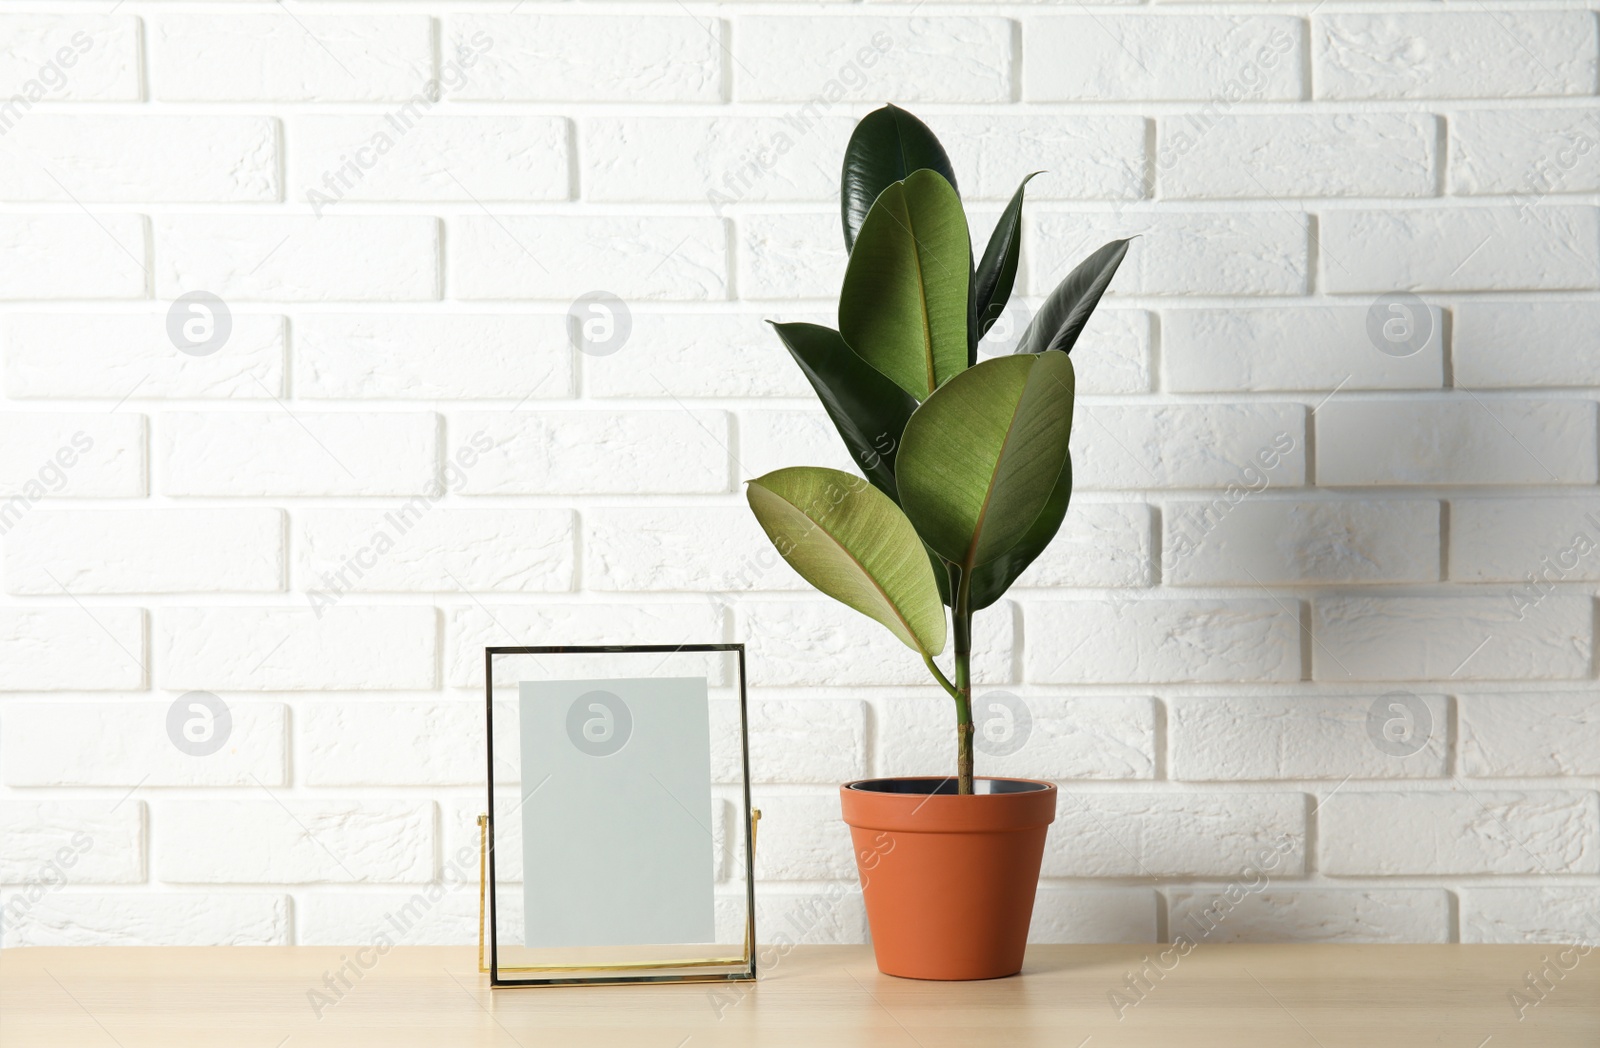 Photo of Rubber plant and photo frame on table near brick wall, space for design. Home decor